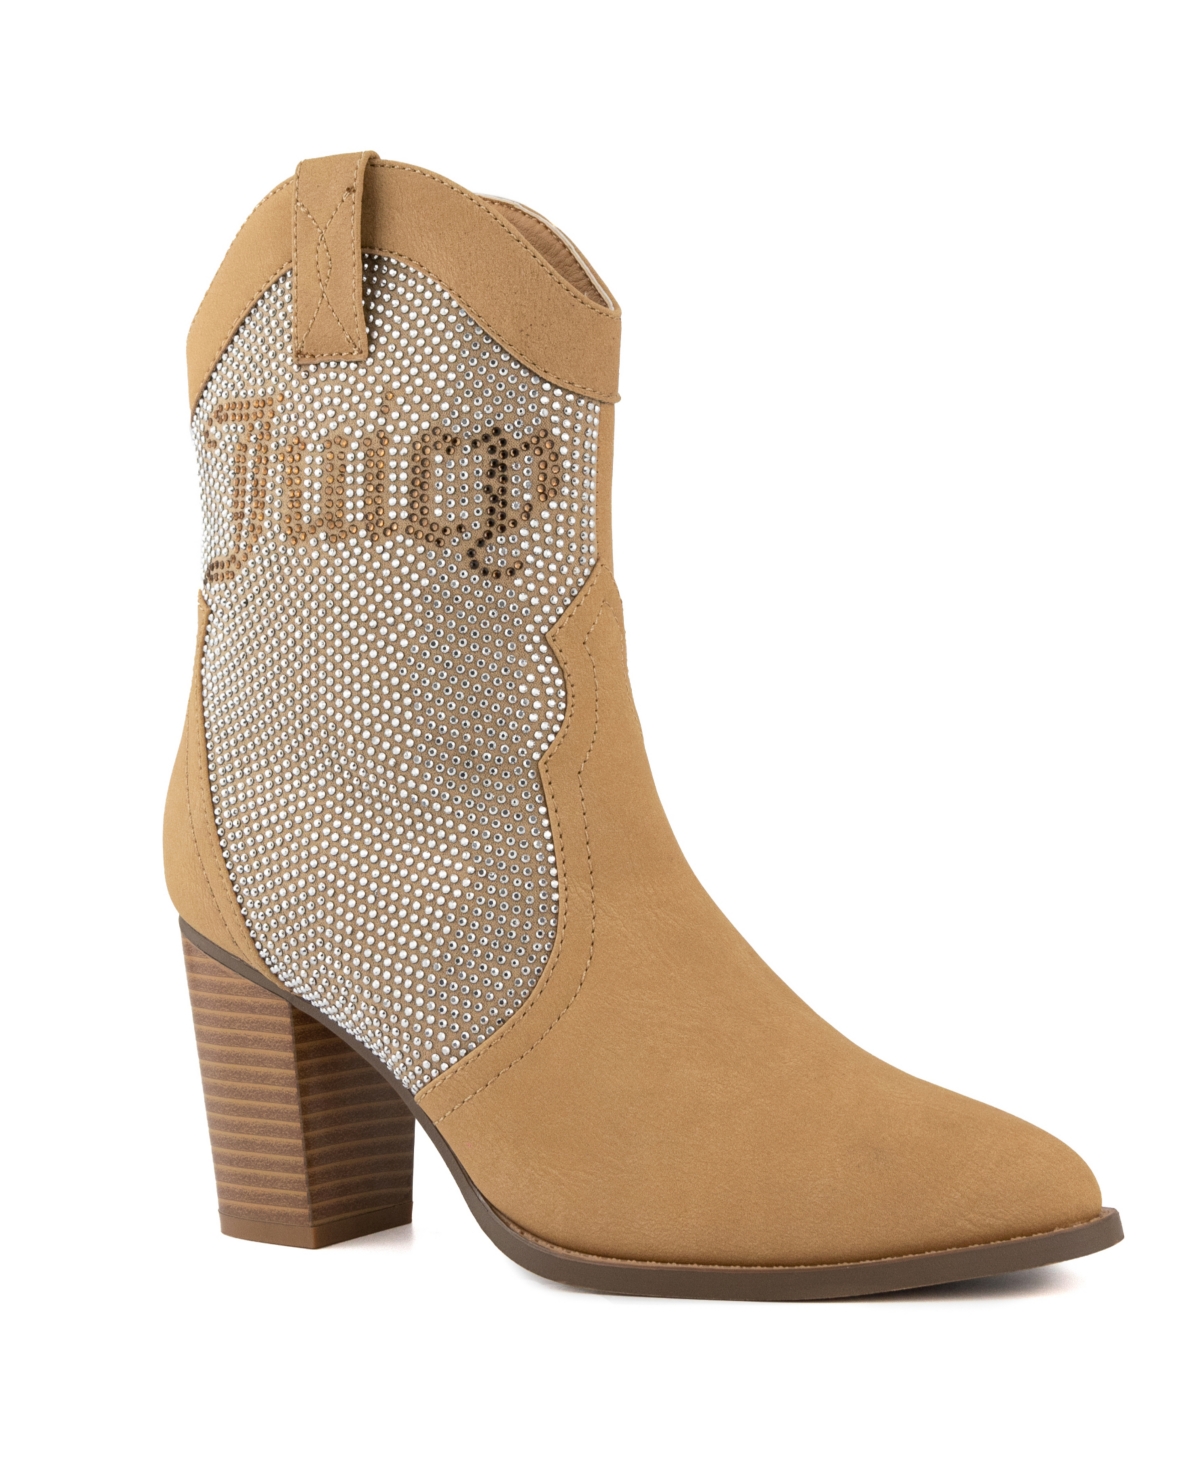 Juicy Couture Women's Tamra Embellished Western Boots In Tan